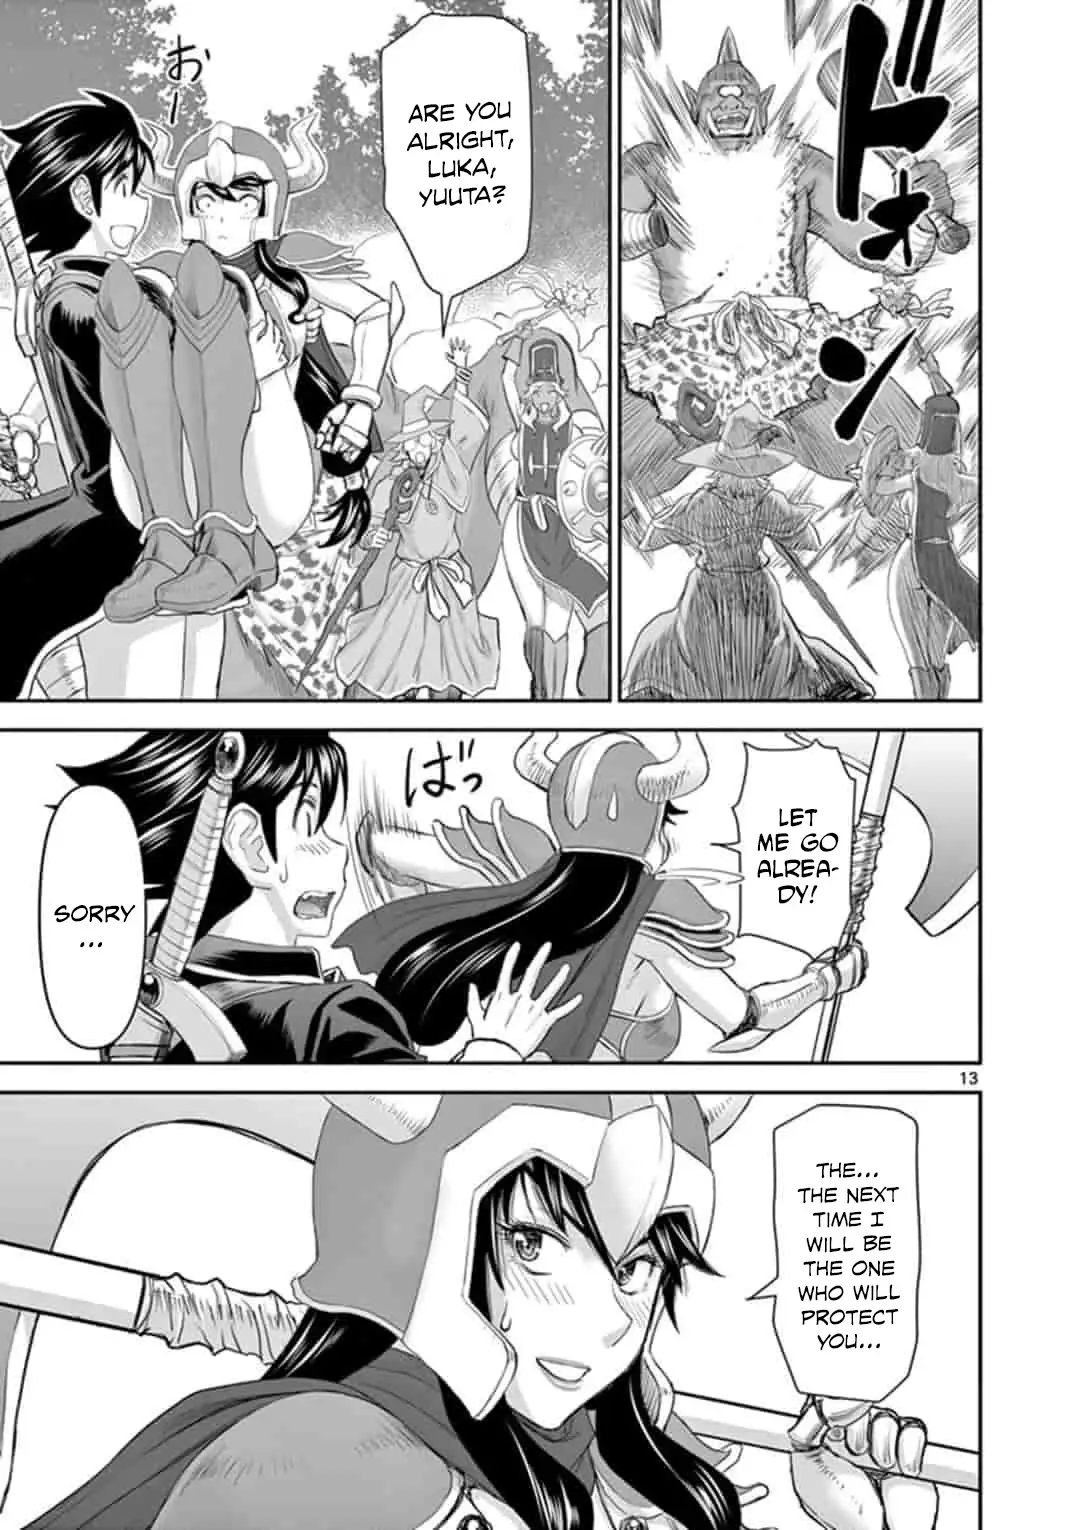 Isekai Affair ~Ten Years After The Demon King's Subjugation, The Married Former Hero And The Female Warrior Who Lost Her Husband ~ - 1 page 13